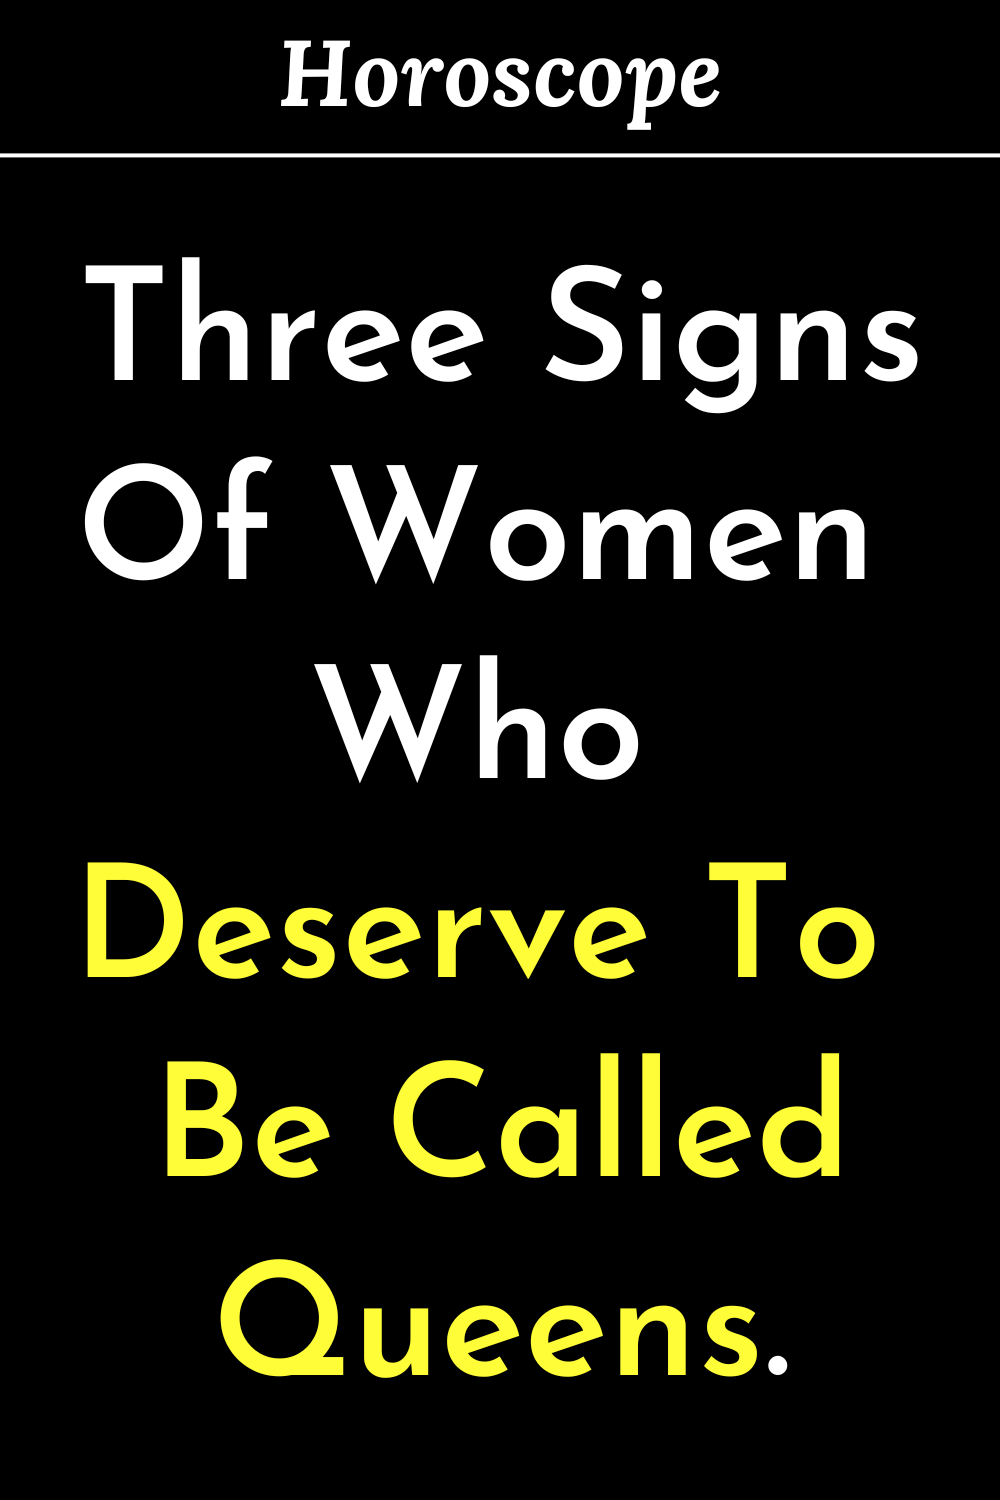 Three Signs Of Women Who Deserve To Be Called Queens.